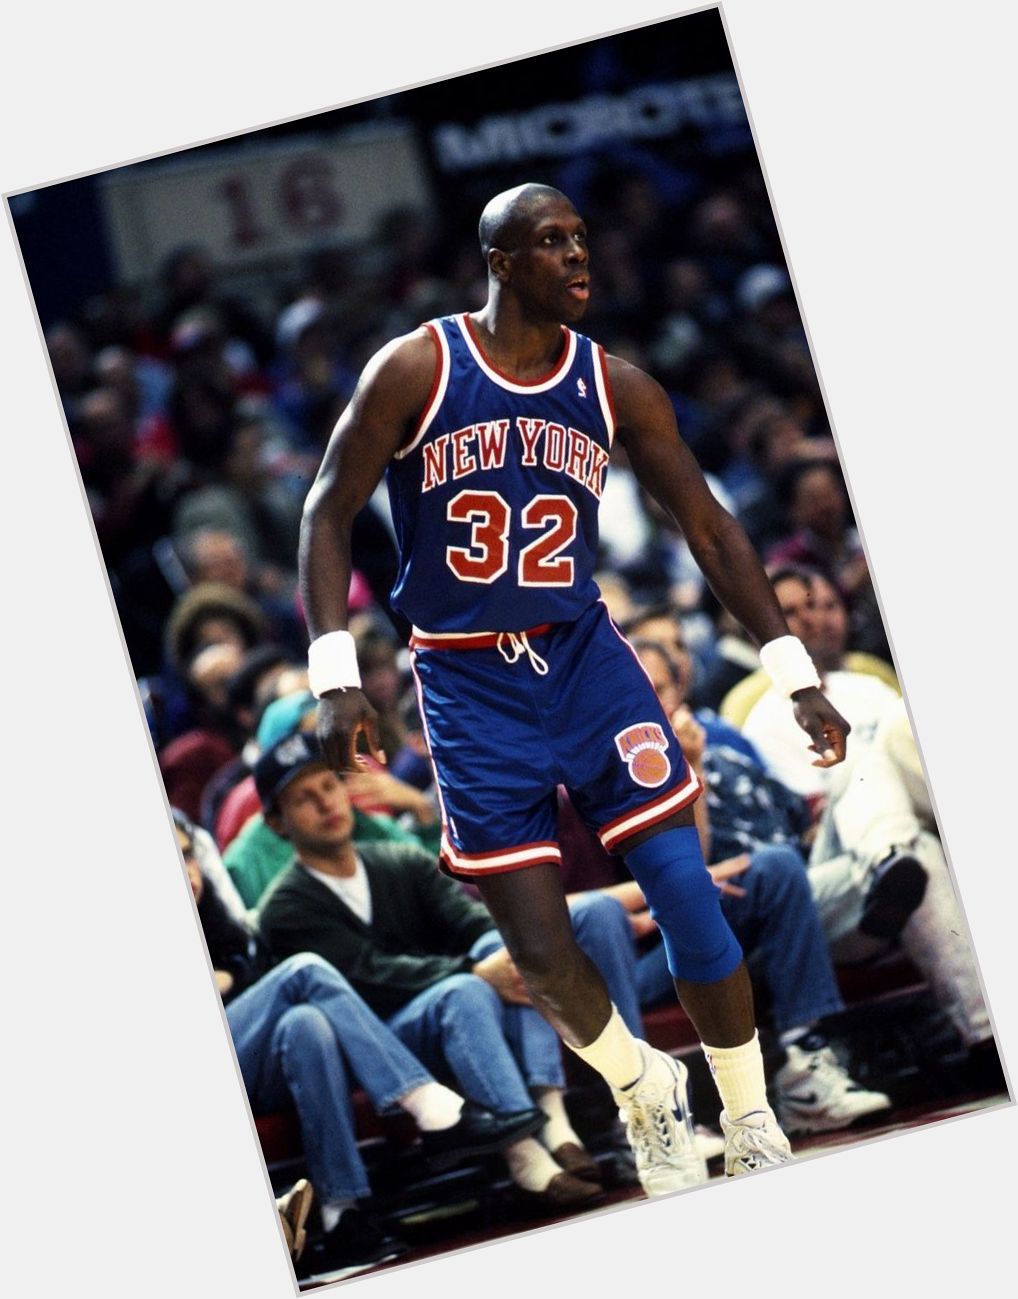 Happy Birthday Xavier McDaniel!  

Do you think of him more as a Sonic? Or a Knick? 